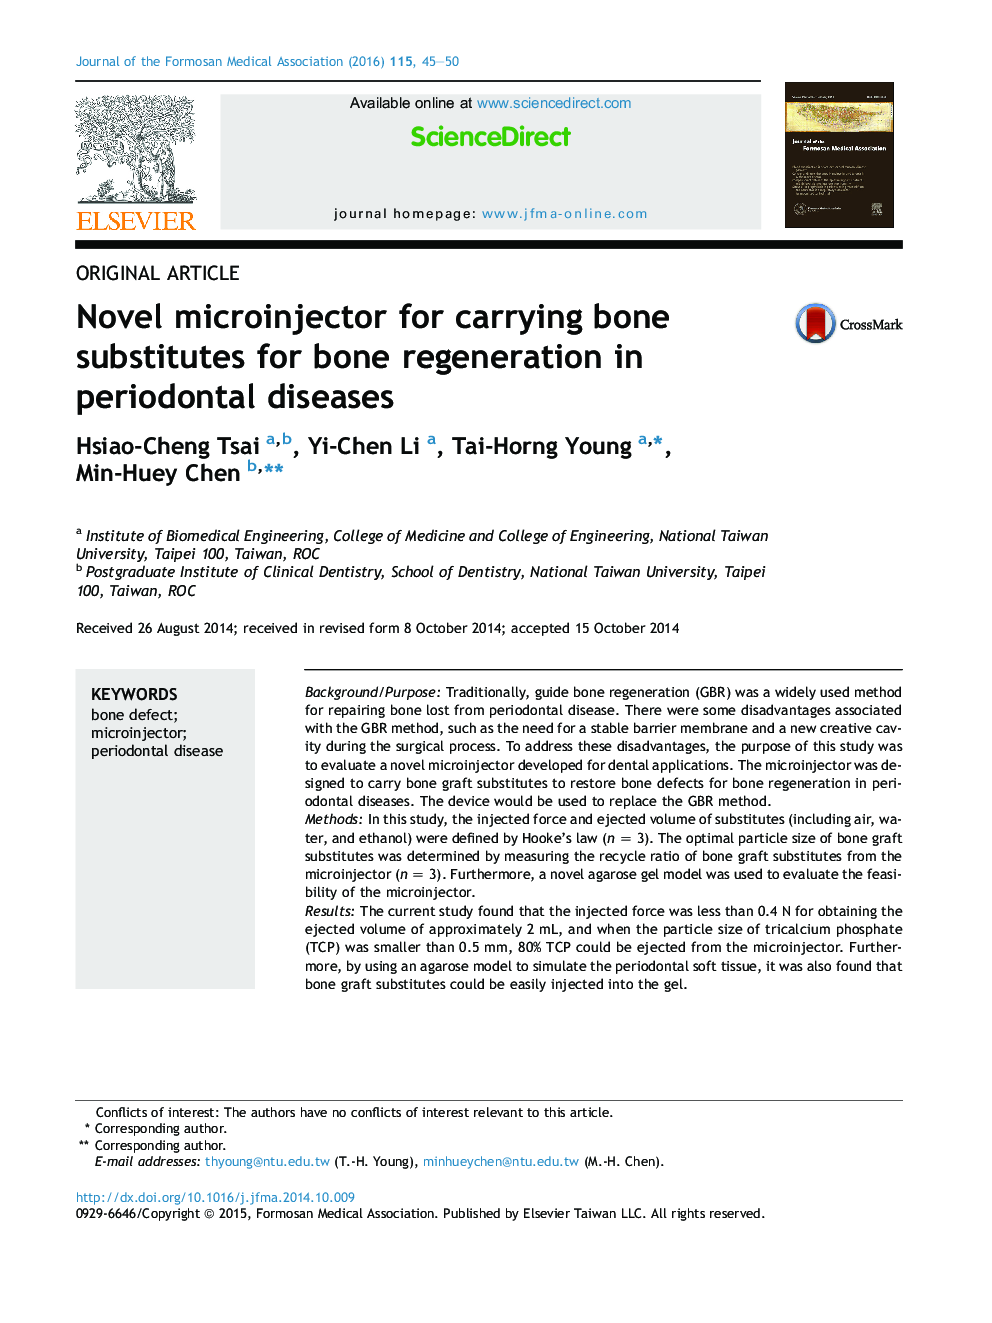 Novel microinjector for carrying bone substitutes for bone regeneration in periodontal diseases 